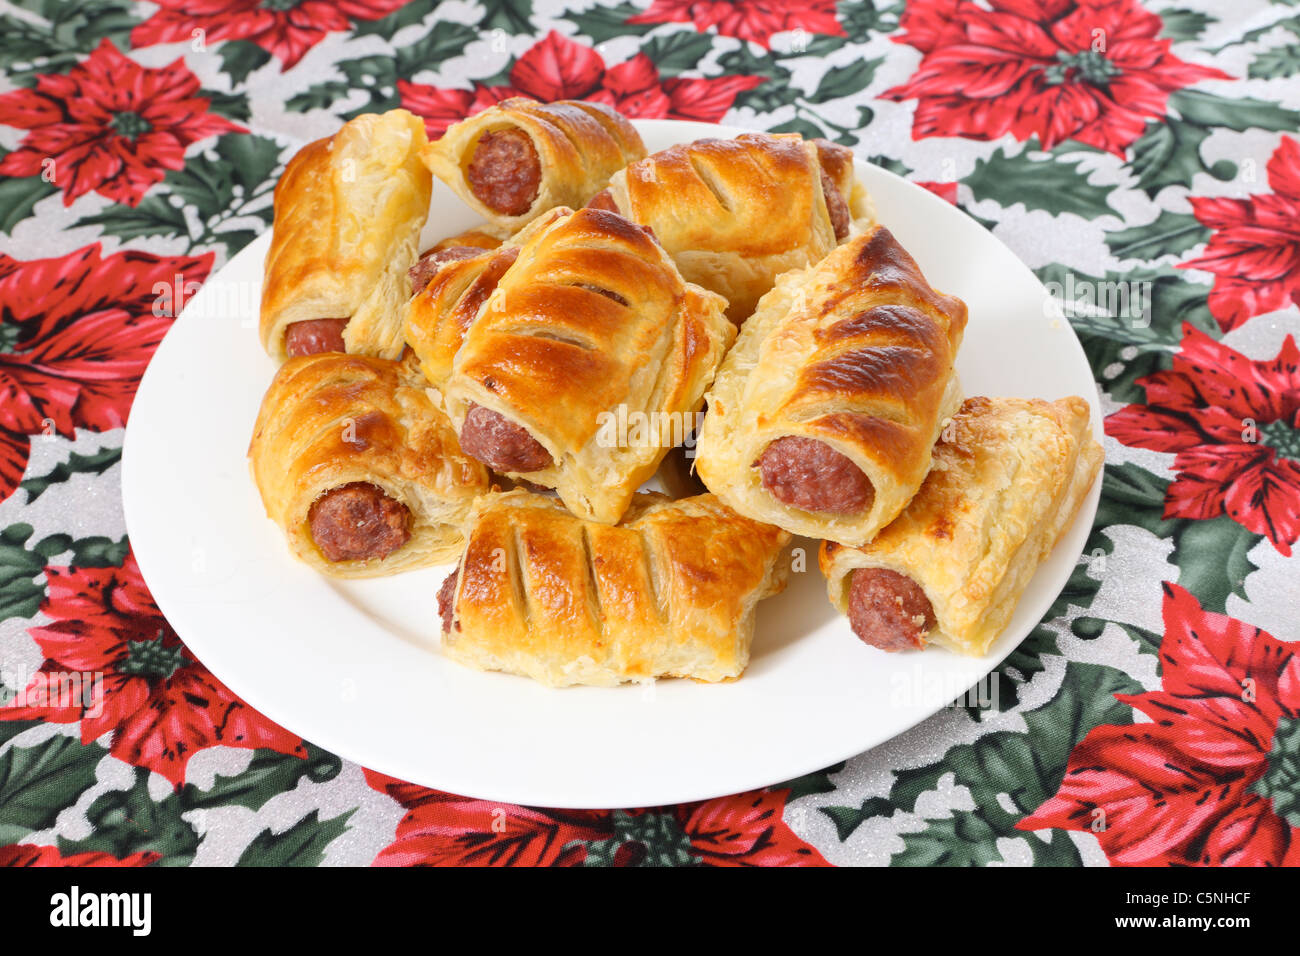 A plate of sausage rolls, traditional British Christmas food, on a